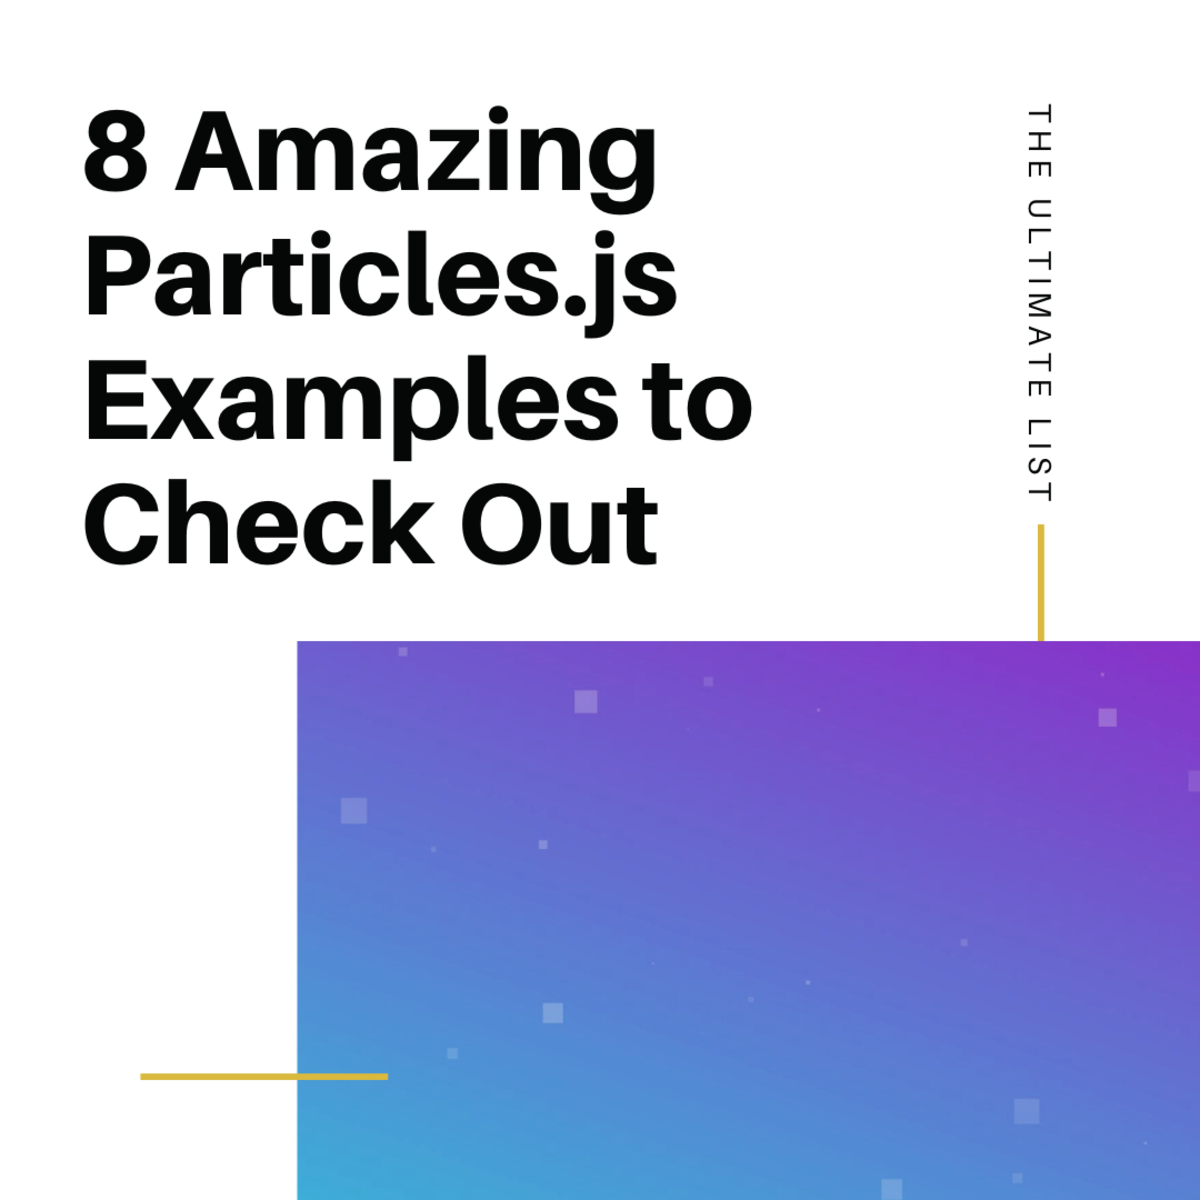 8 Amazing Particles.js Examples to Check Out: The Ultimate List